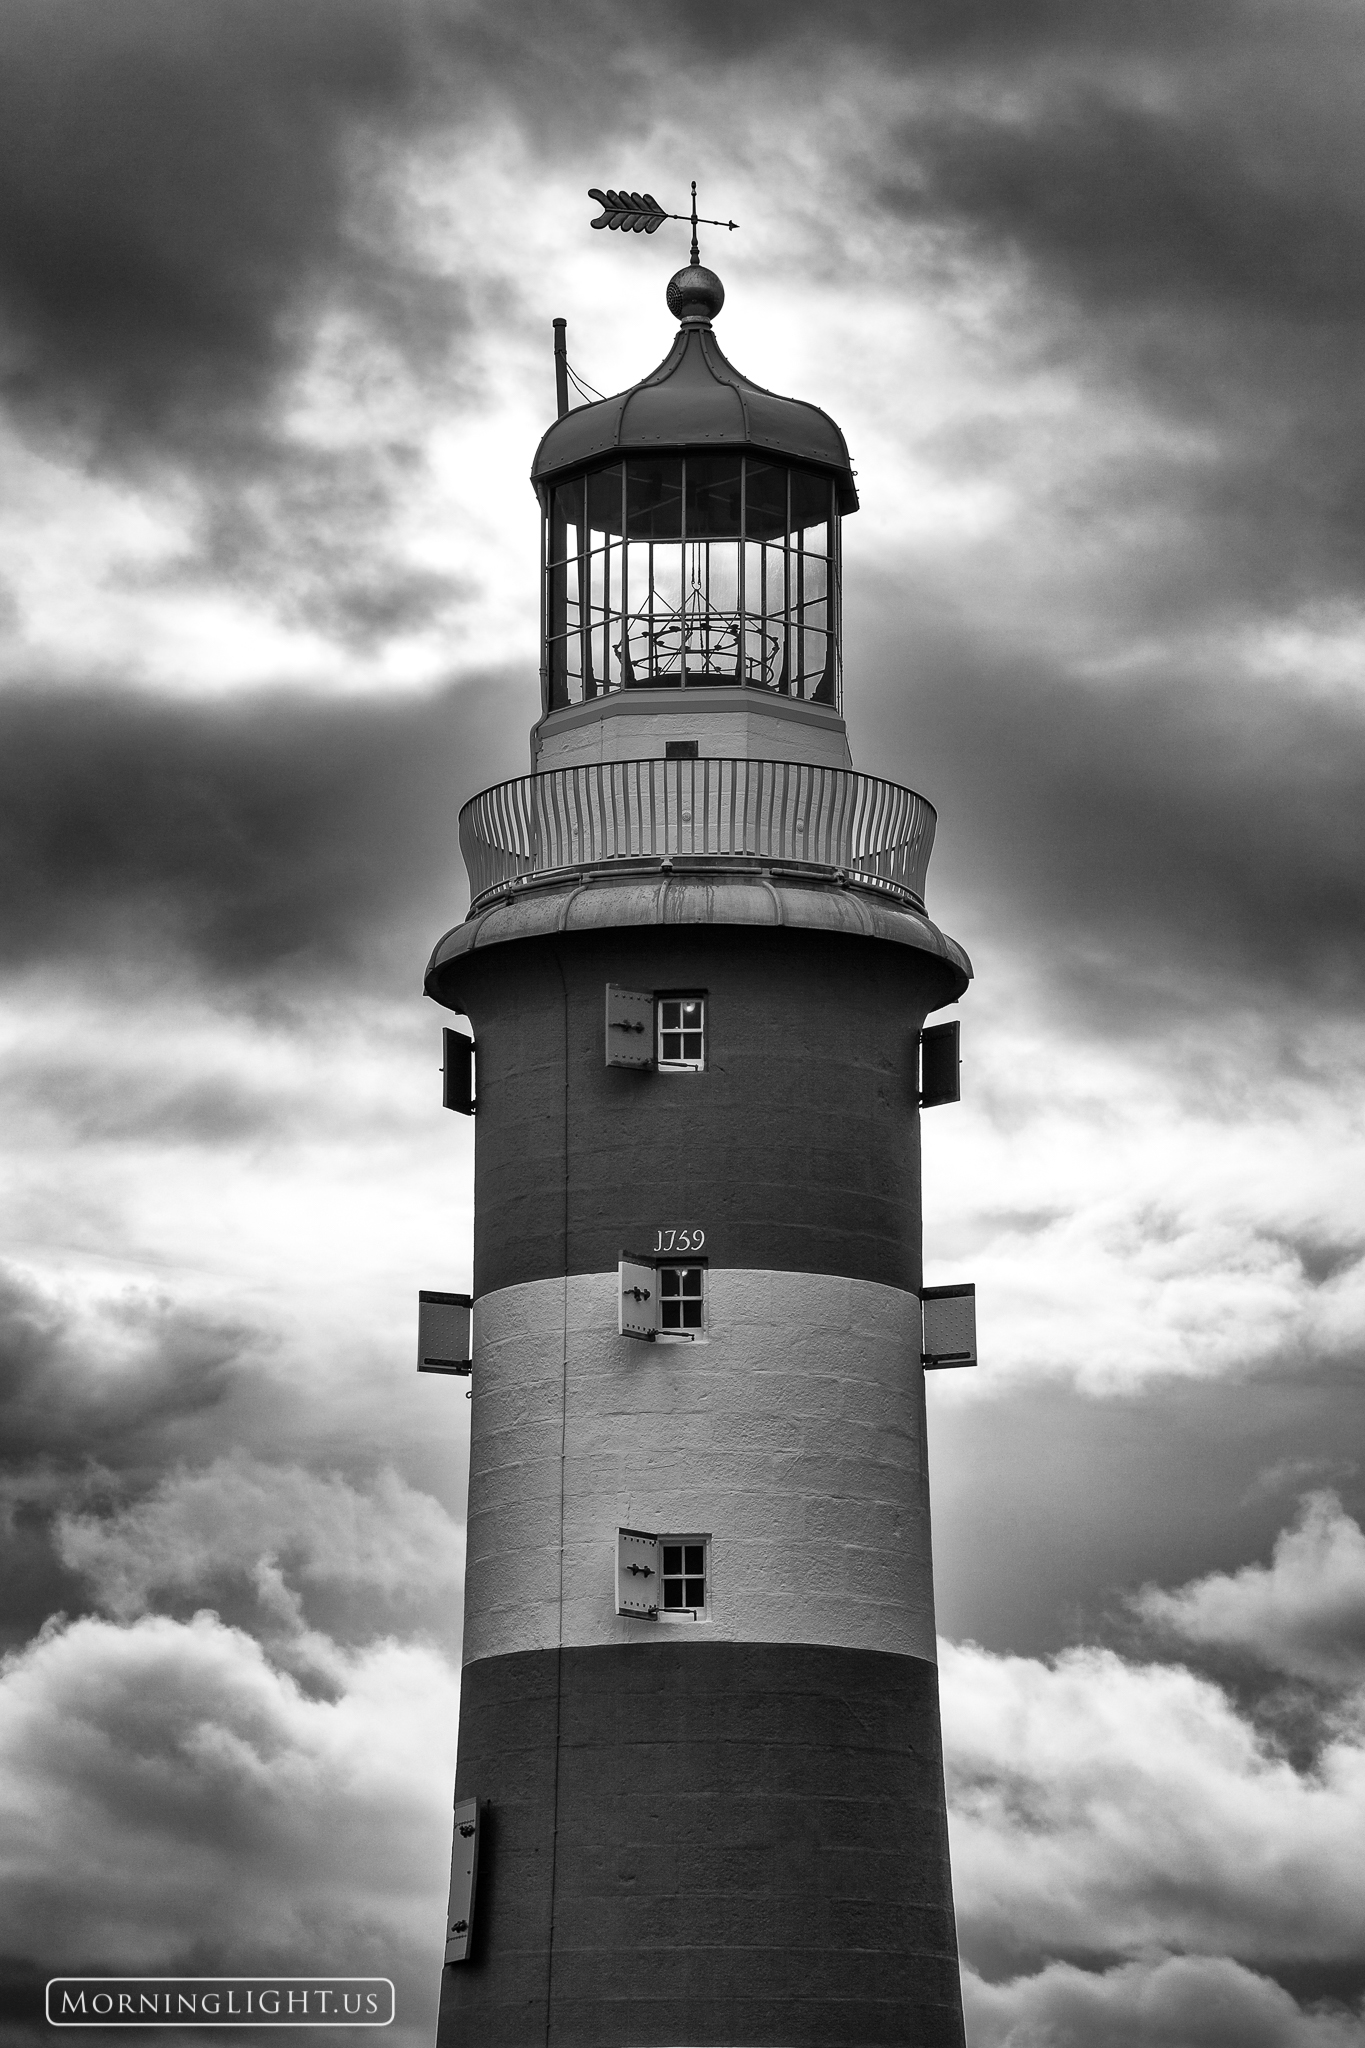 As as storm passes by Smeaton's Tower, a lighthouse in Plymouth England stands proudly, undaunted by the storm's threats.